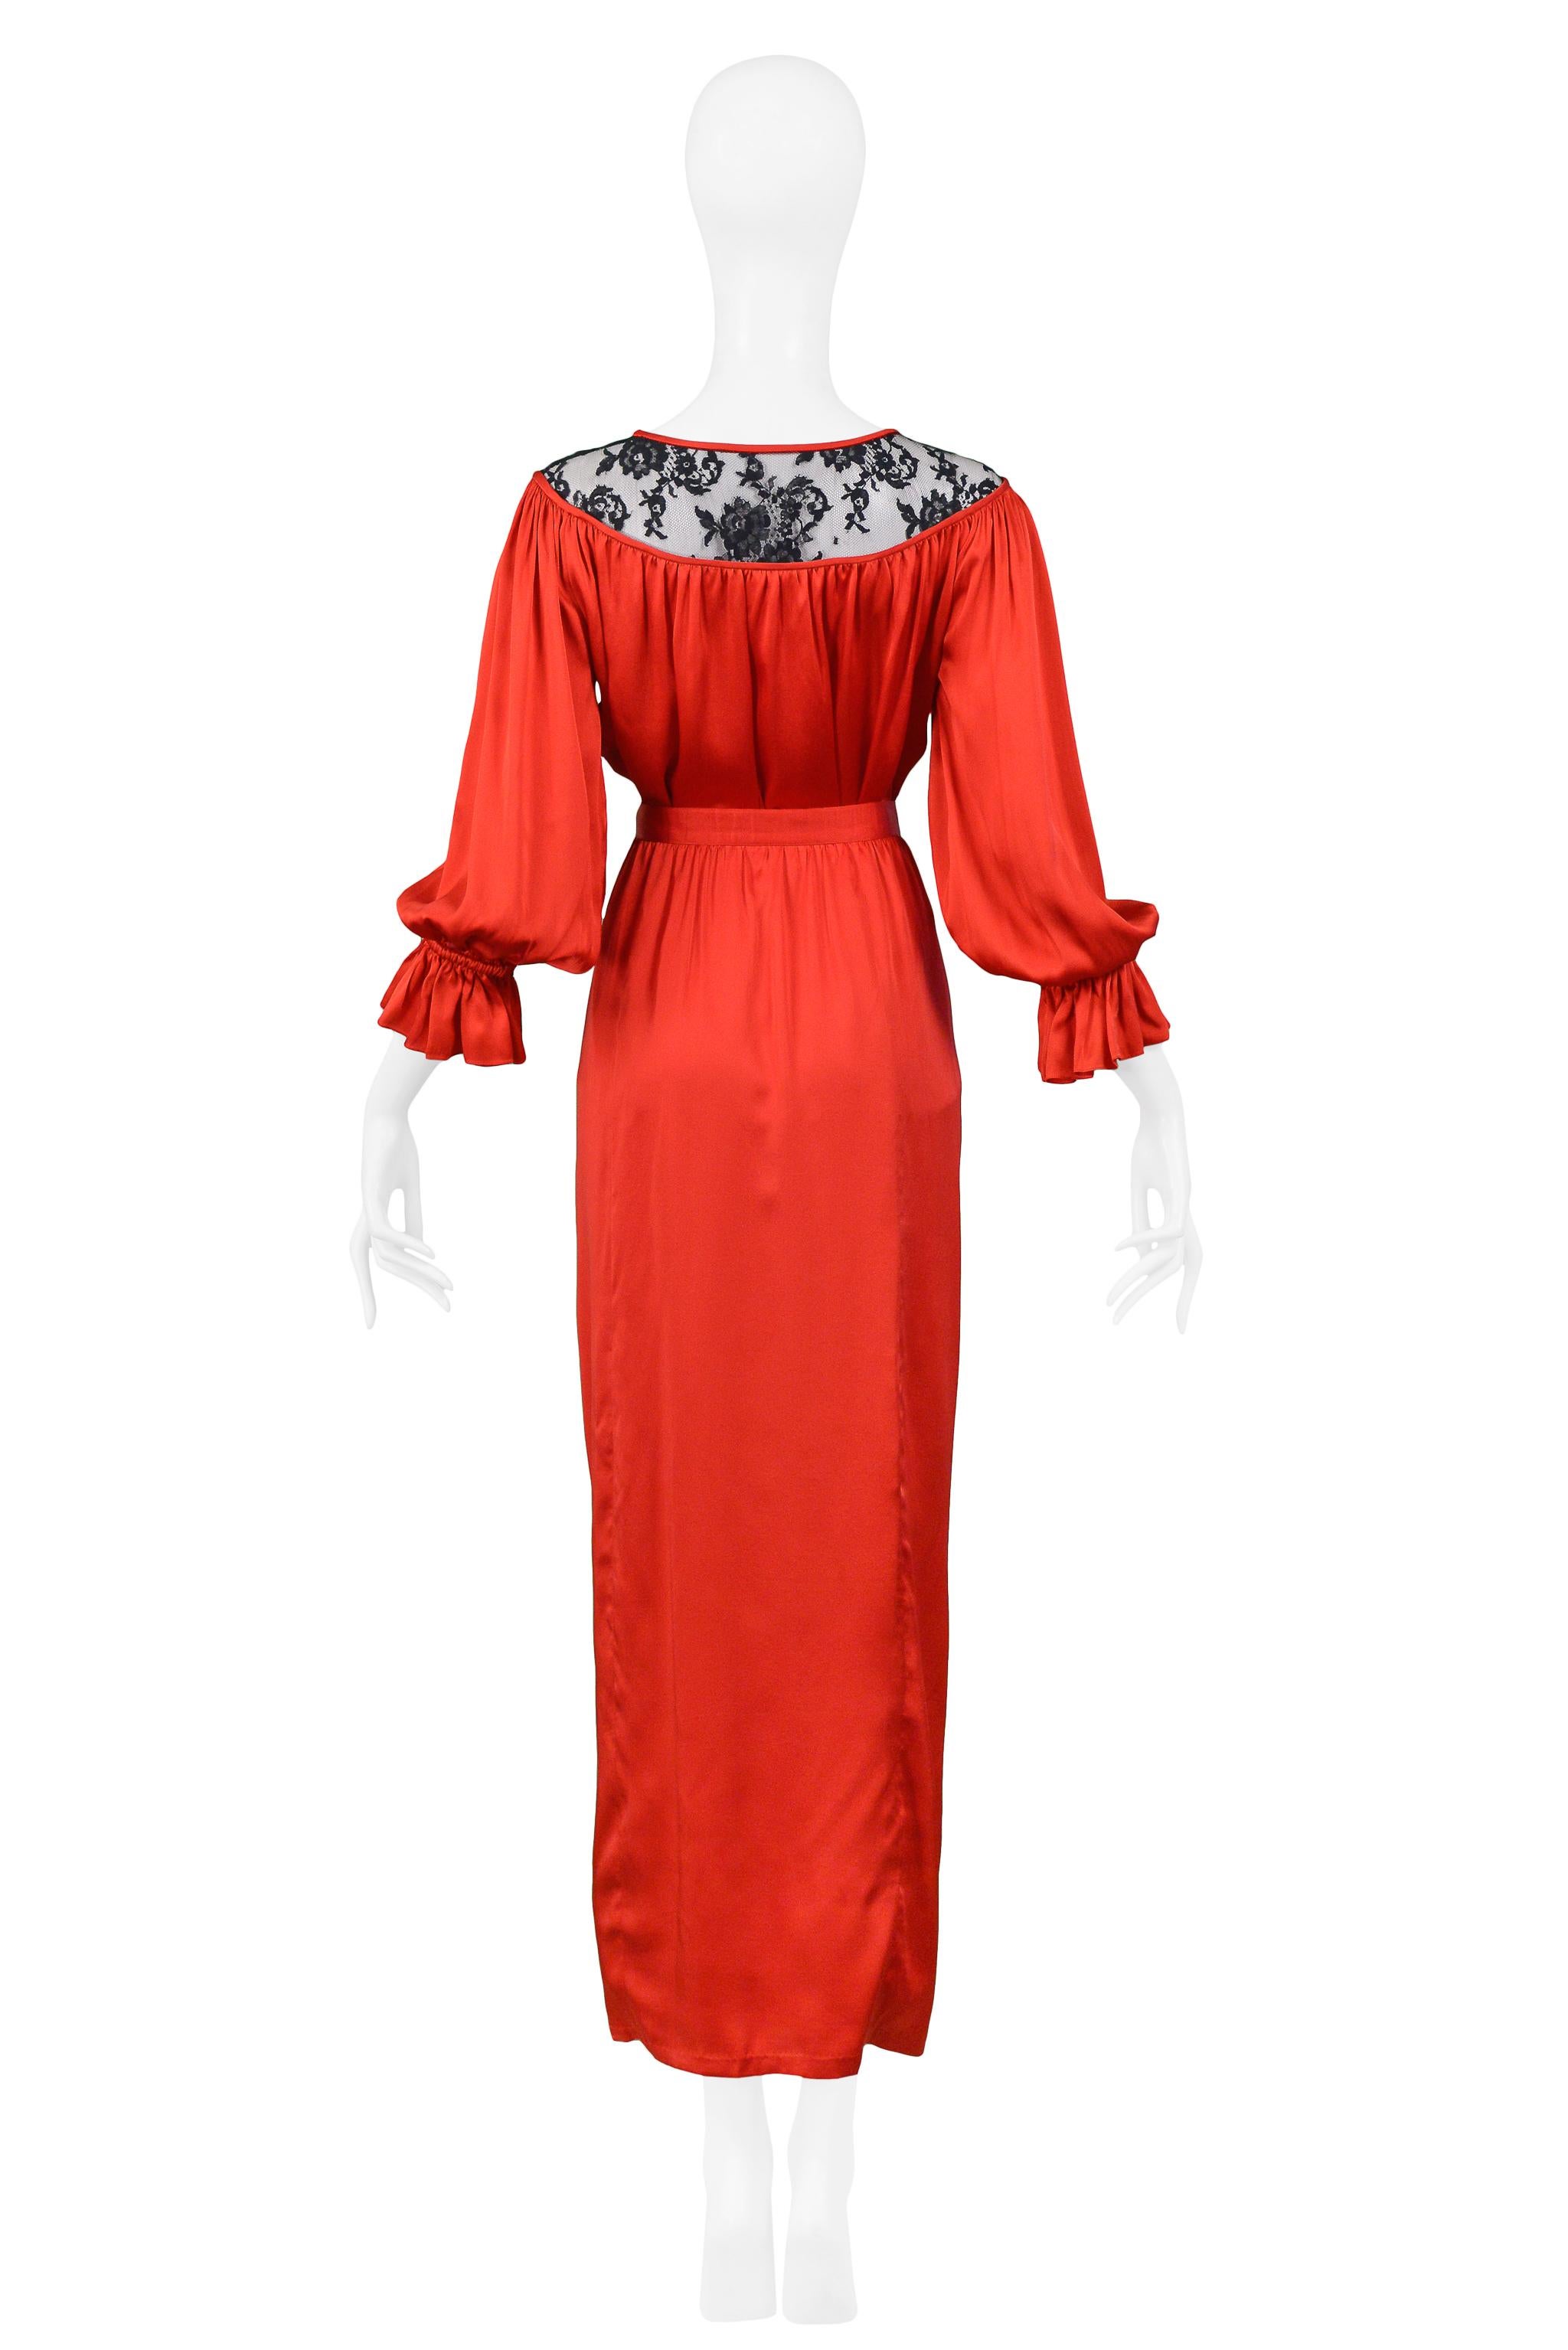 Vintage Yves Saint Laurent Red Satin & Black Lace Ensemble In Excellent Condition For Sale In Los Angeles, CA